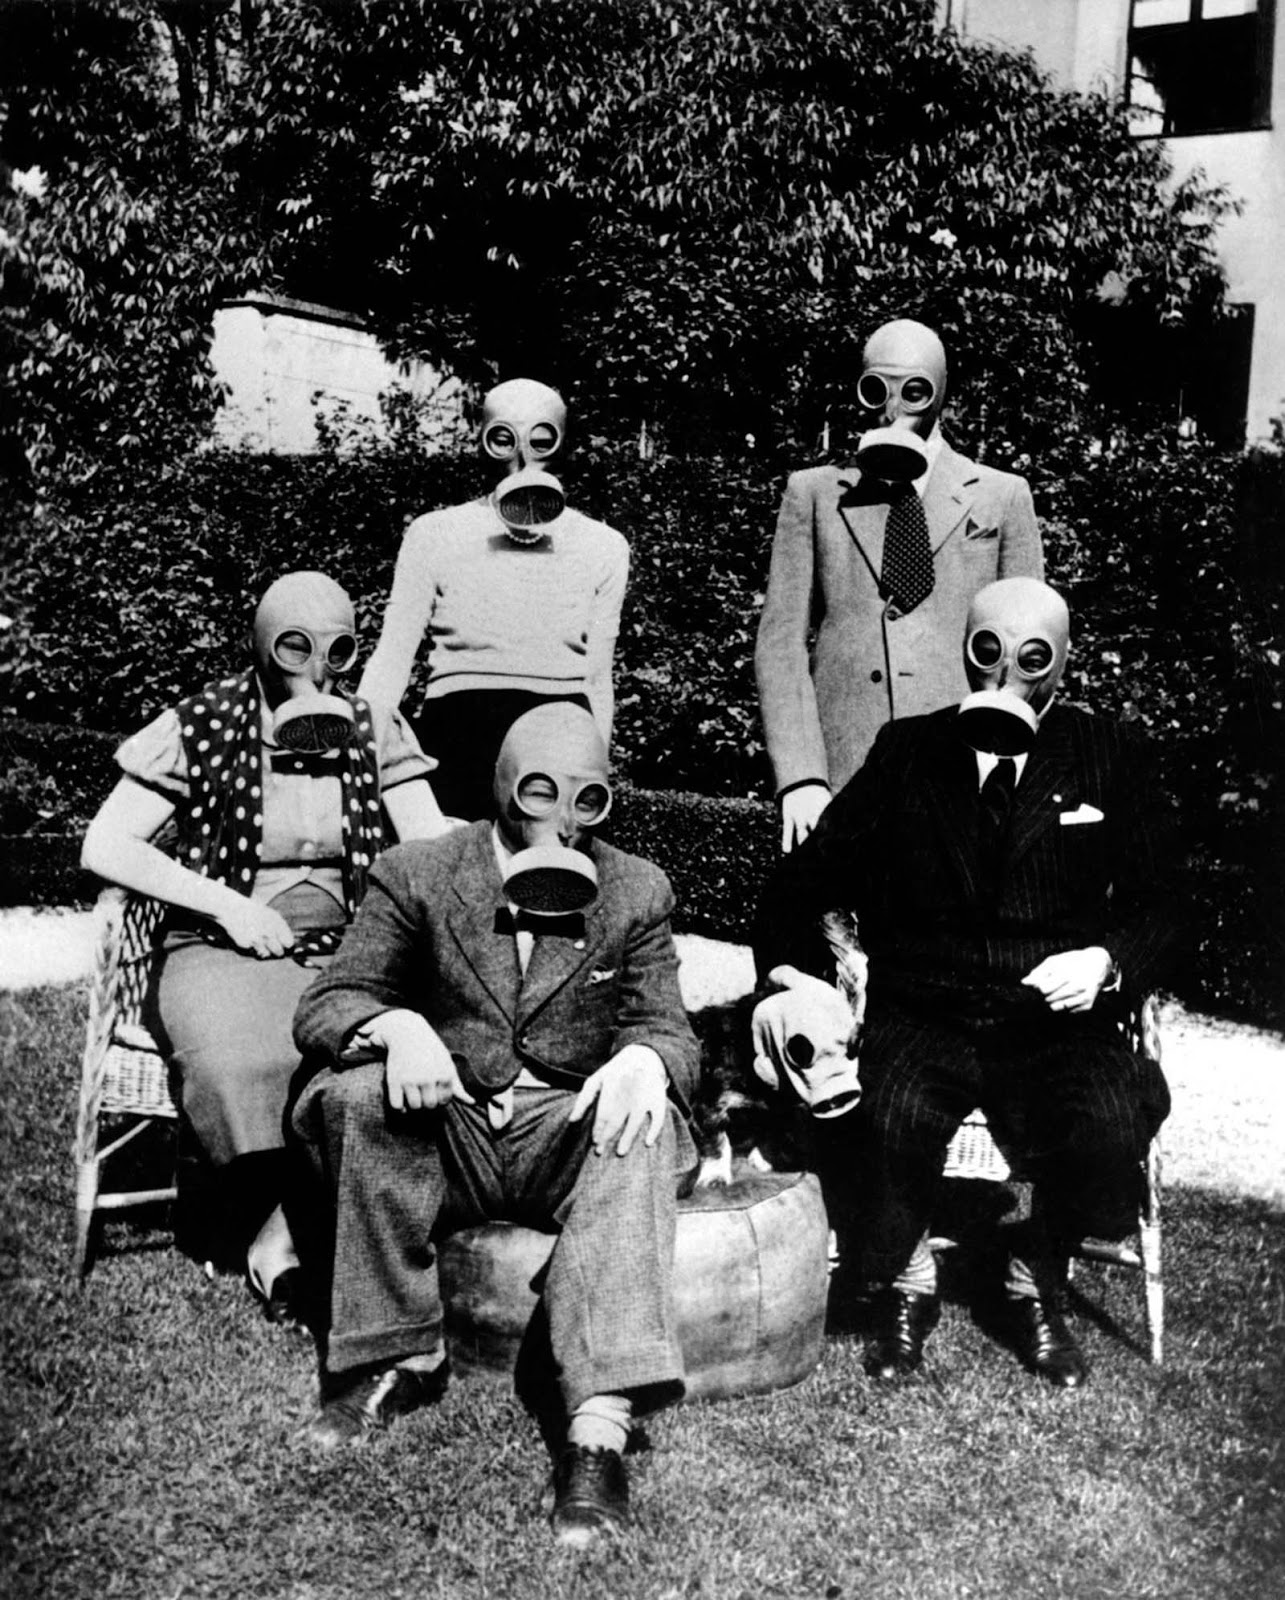 An American family and their dog at the beginning of World War II show off their gas masks in preparation for a possible gas attack in 1940 in Berlin, Germany.